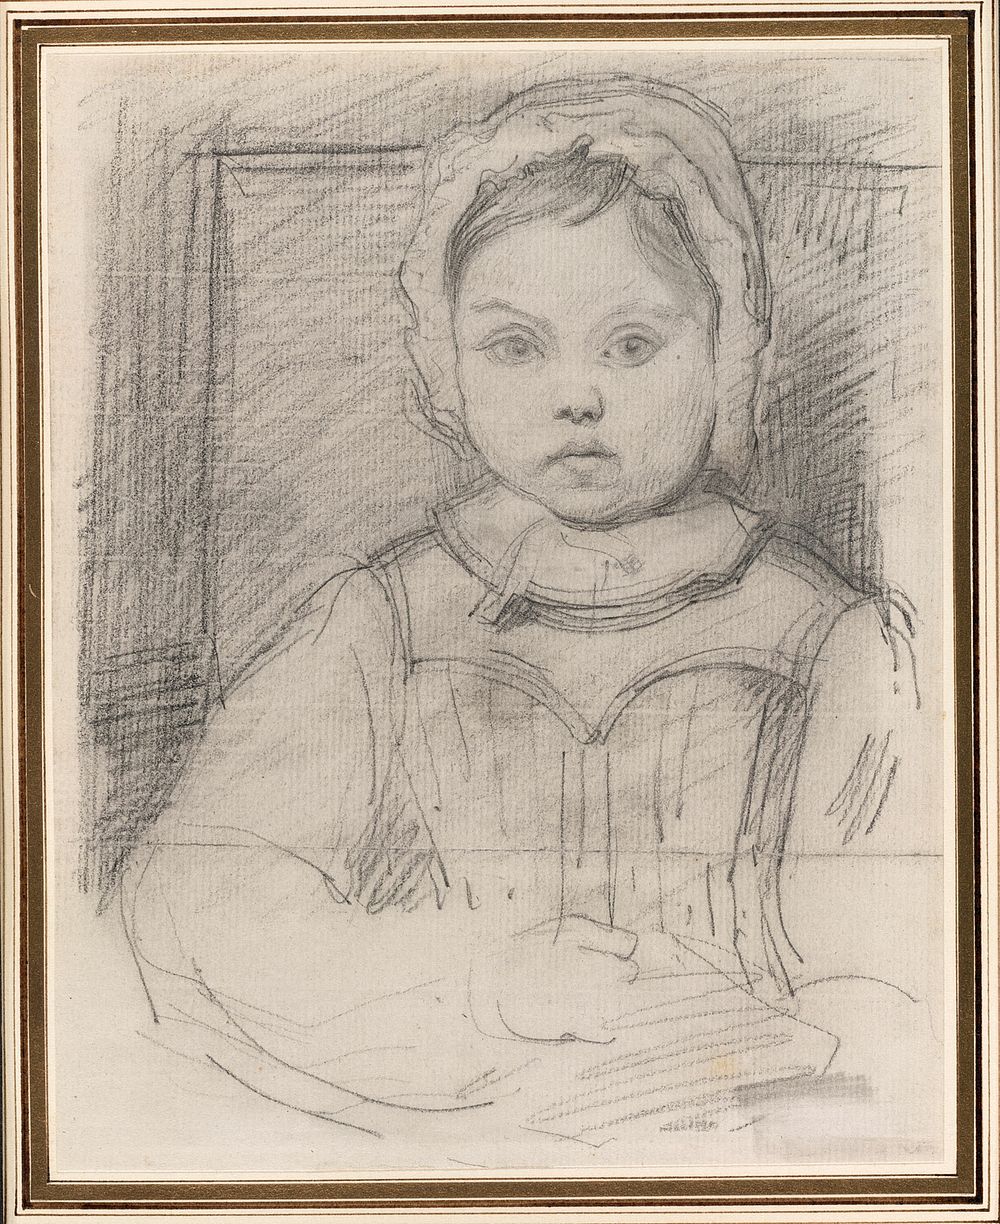 Portrait of Louis Robert, 3 years old by Jean Baptiste Camille Corot